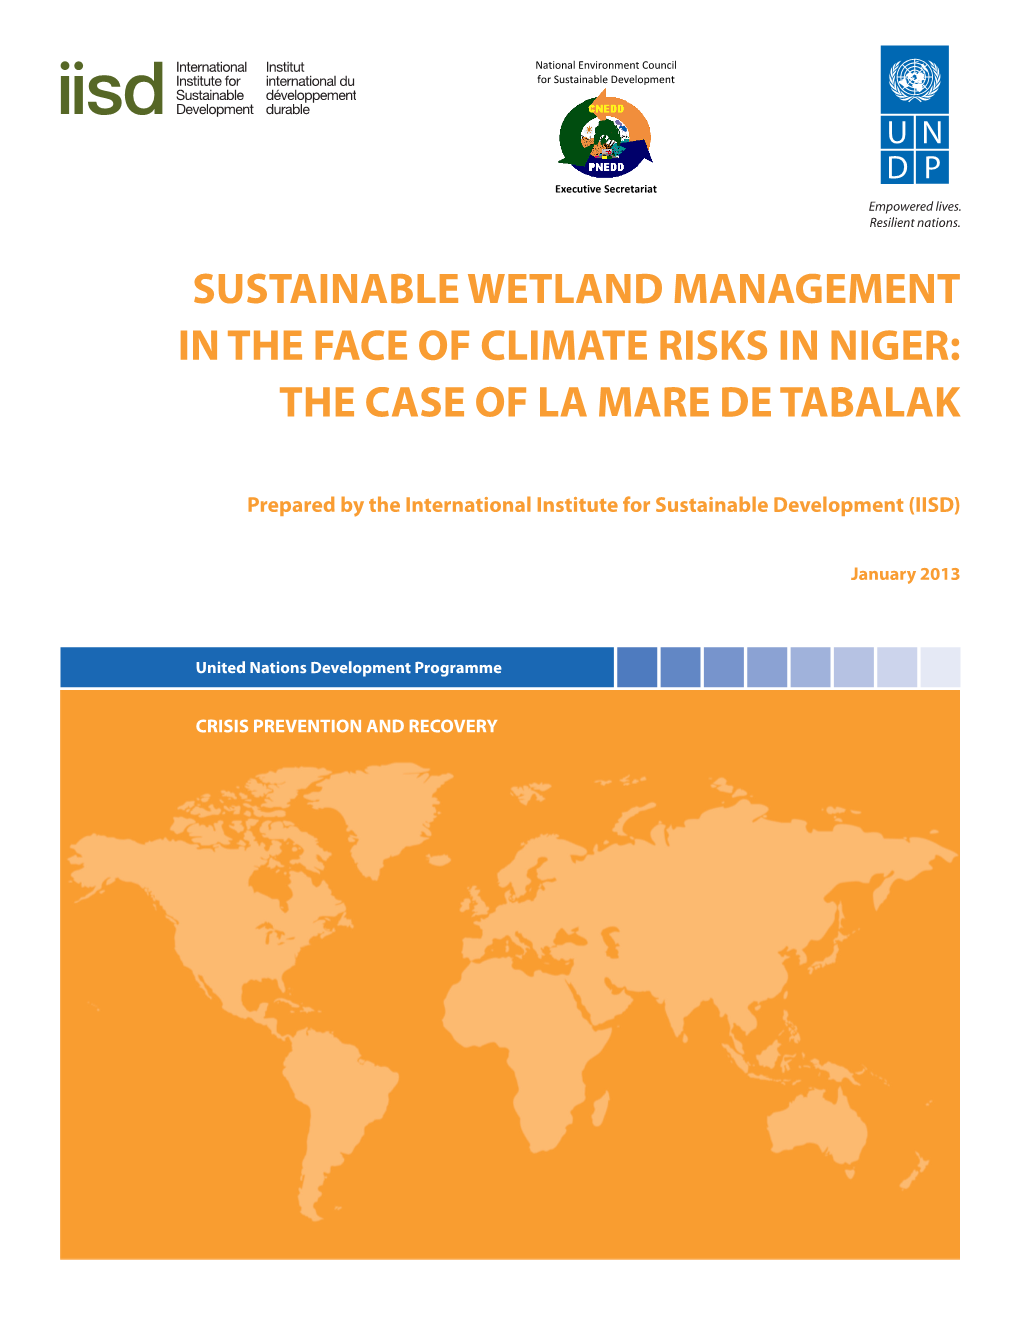 Sustainable Wetland Management in the Face of Climate Risks in Niger: the Case of La Mare De Tabalak